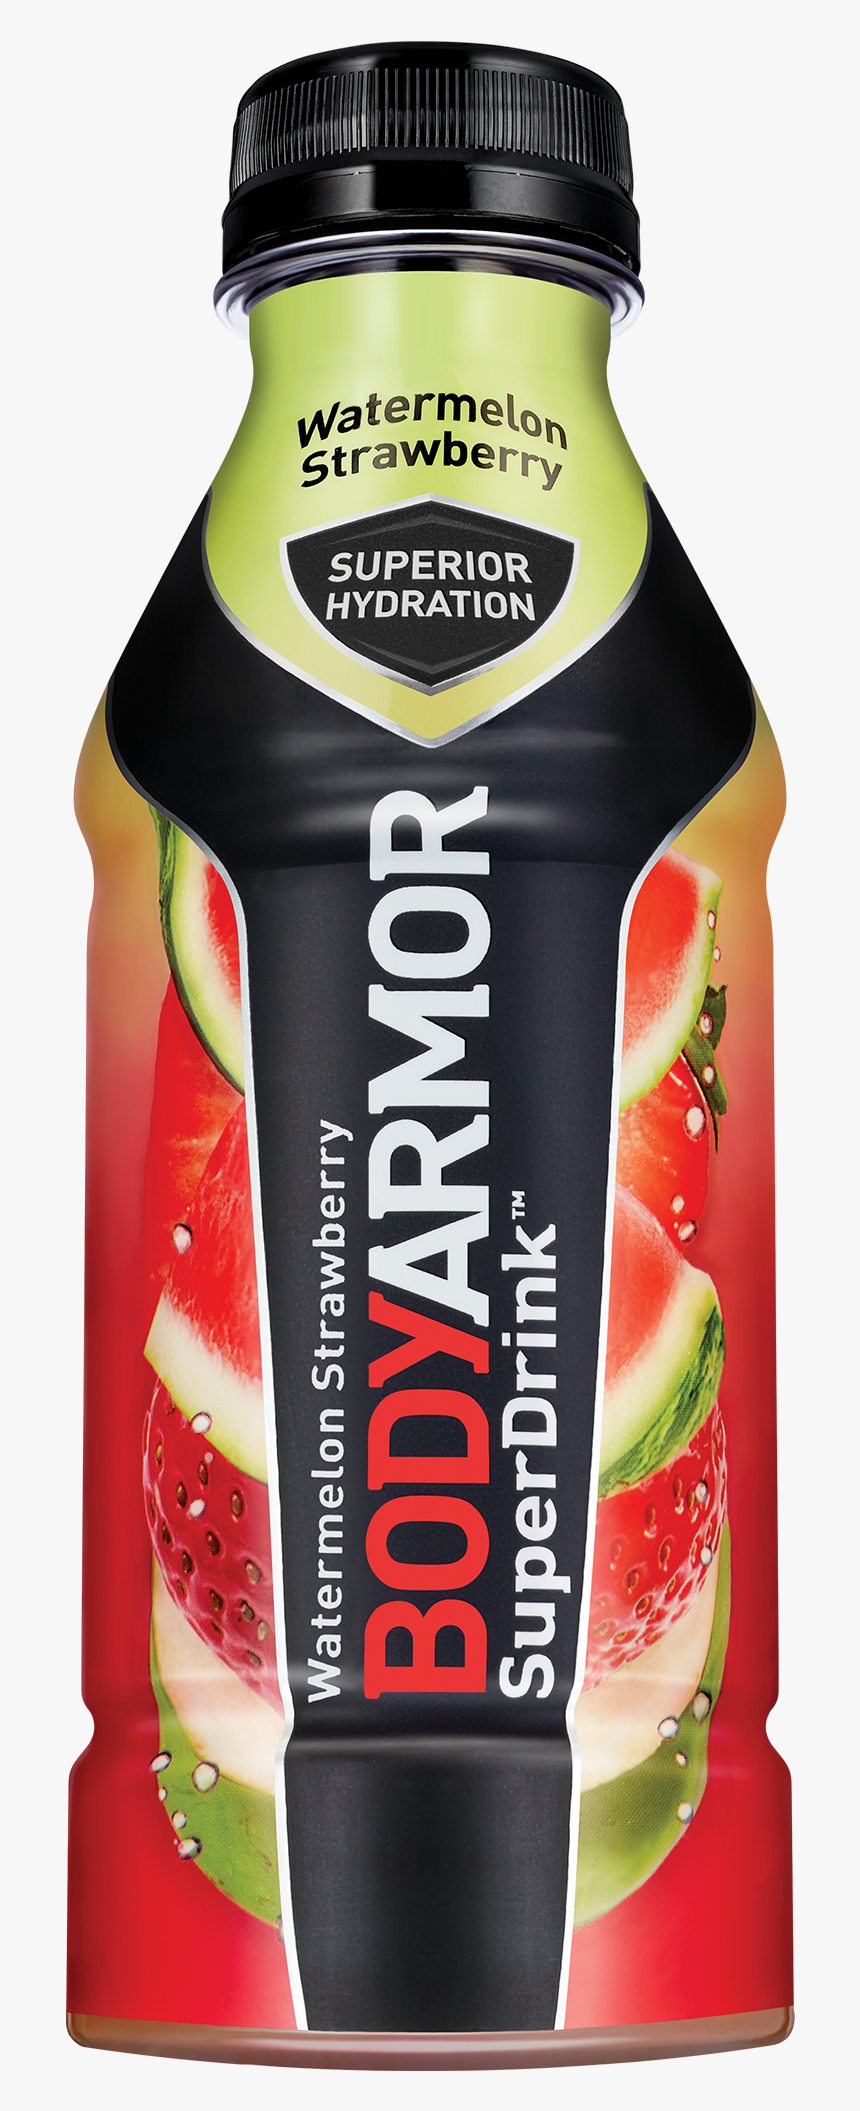 Body Armor Drink Watermelon Strawberry, HD Png Download, Free Download